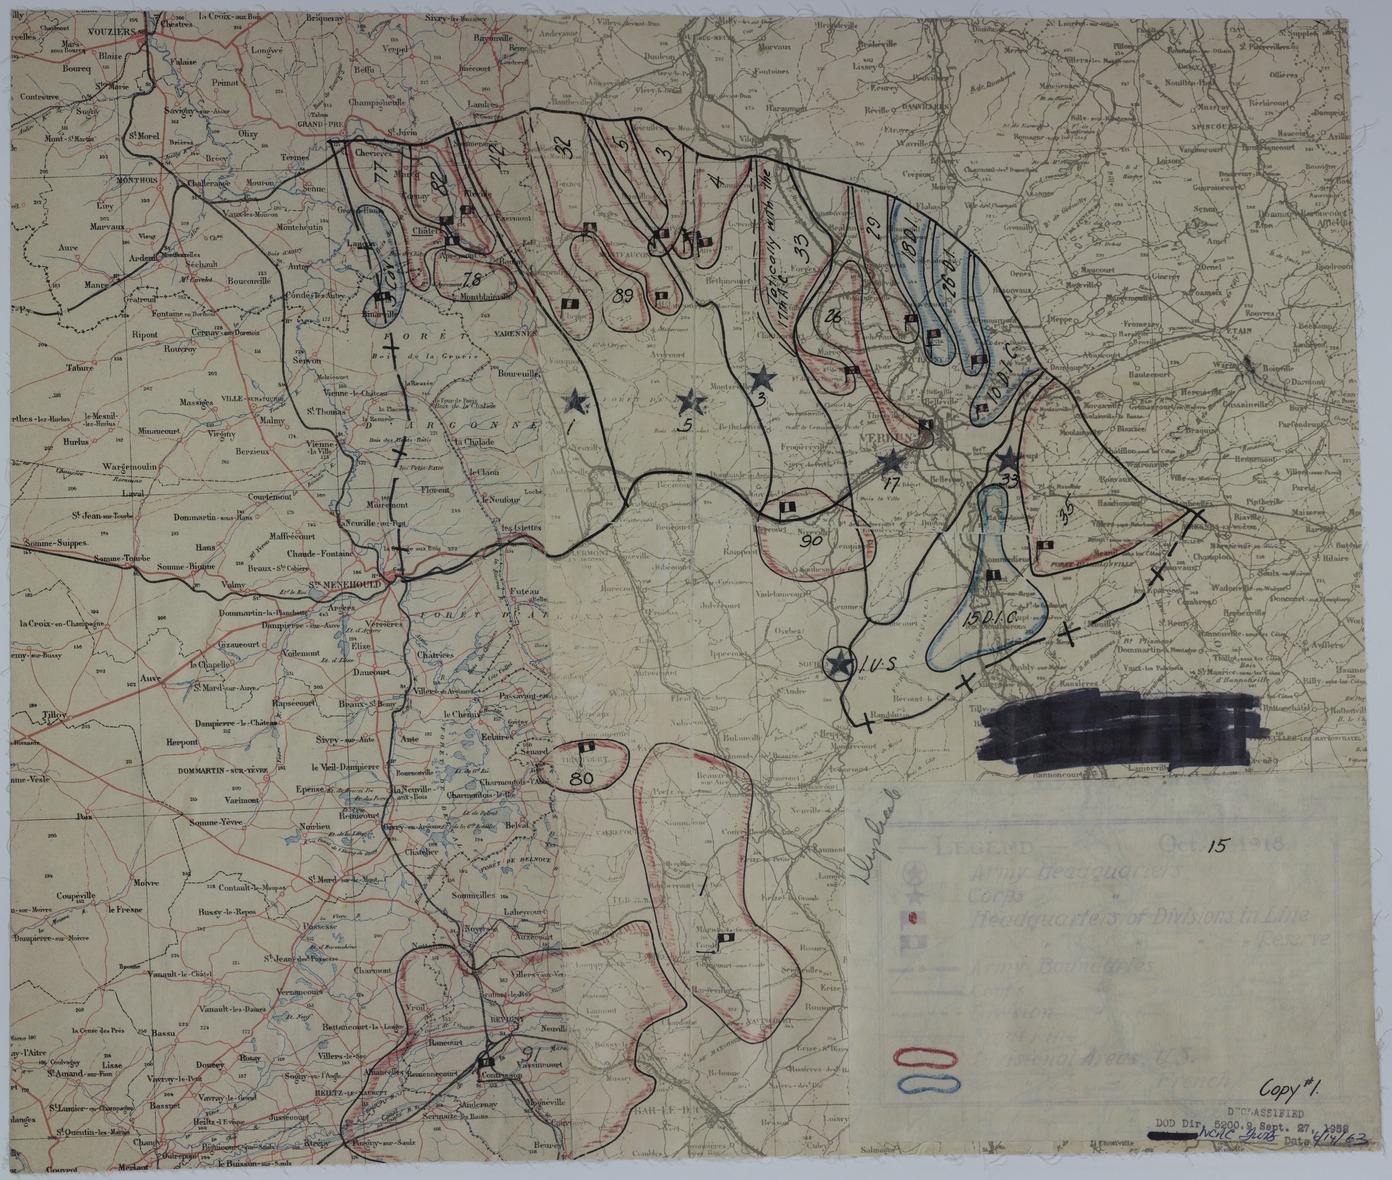 Map of Divisional Positions on October 15, 1918